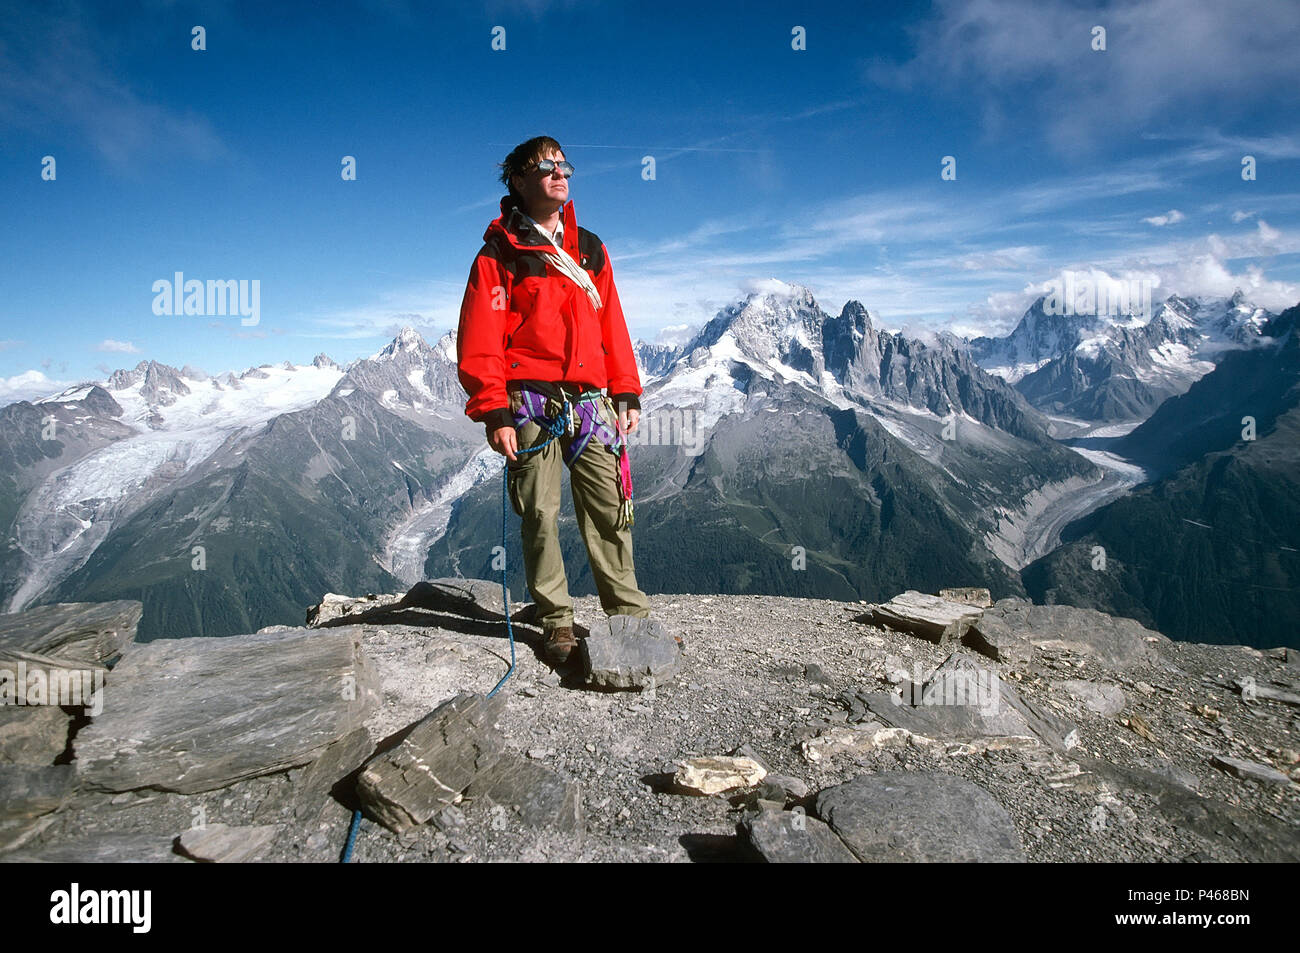 A climber poses on the summit of Aiguille de la Belvedere in the Chamonix Alps, France Stock Photo